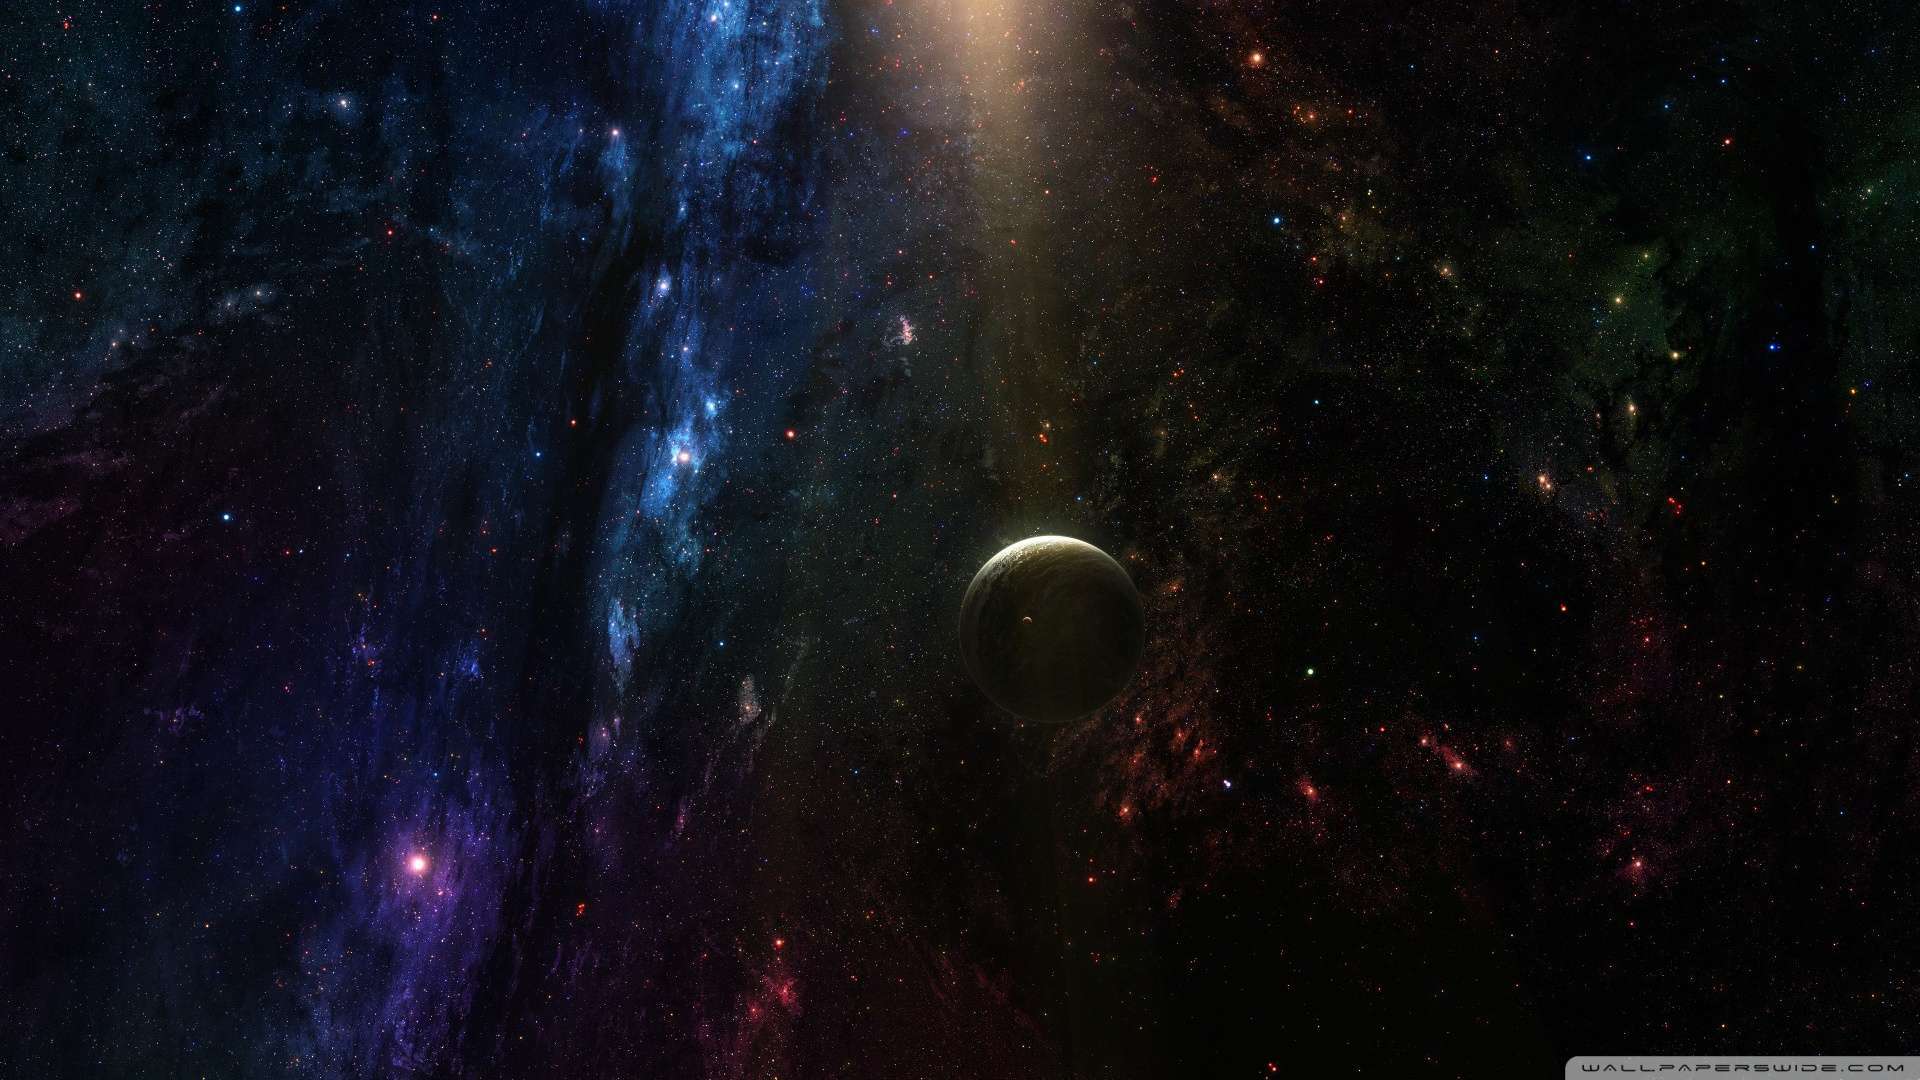 Wallpaper Pla In Deep Space 1080p HD Upload At February